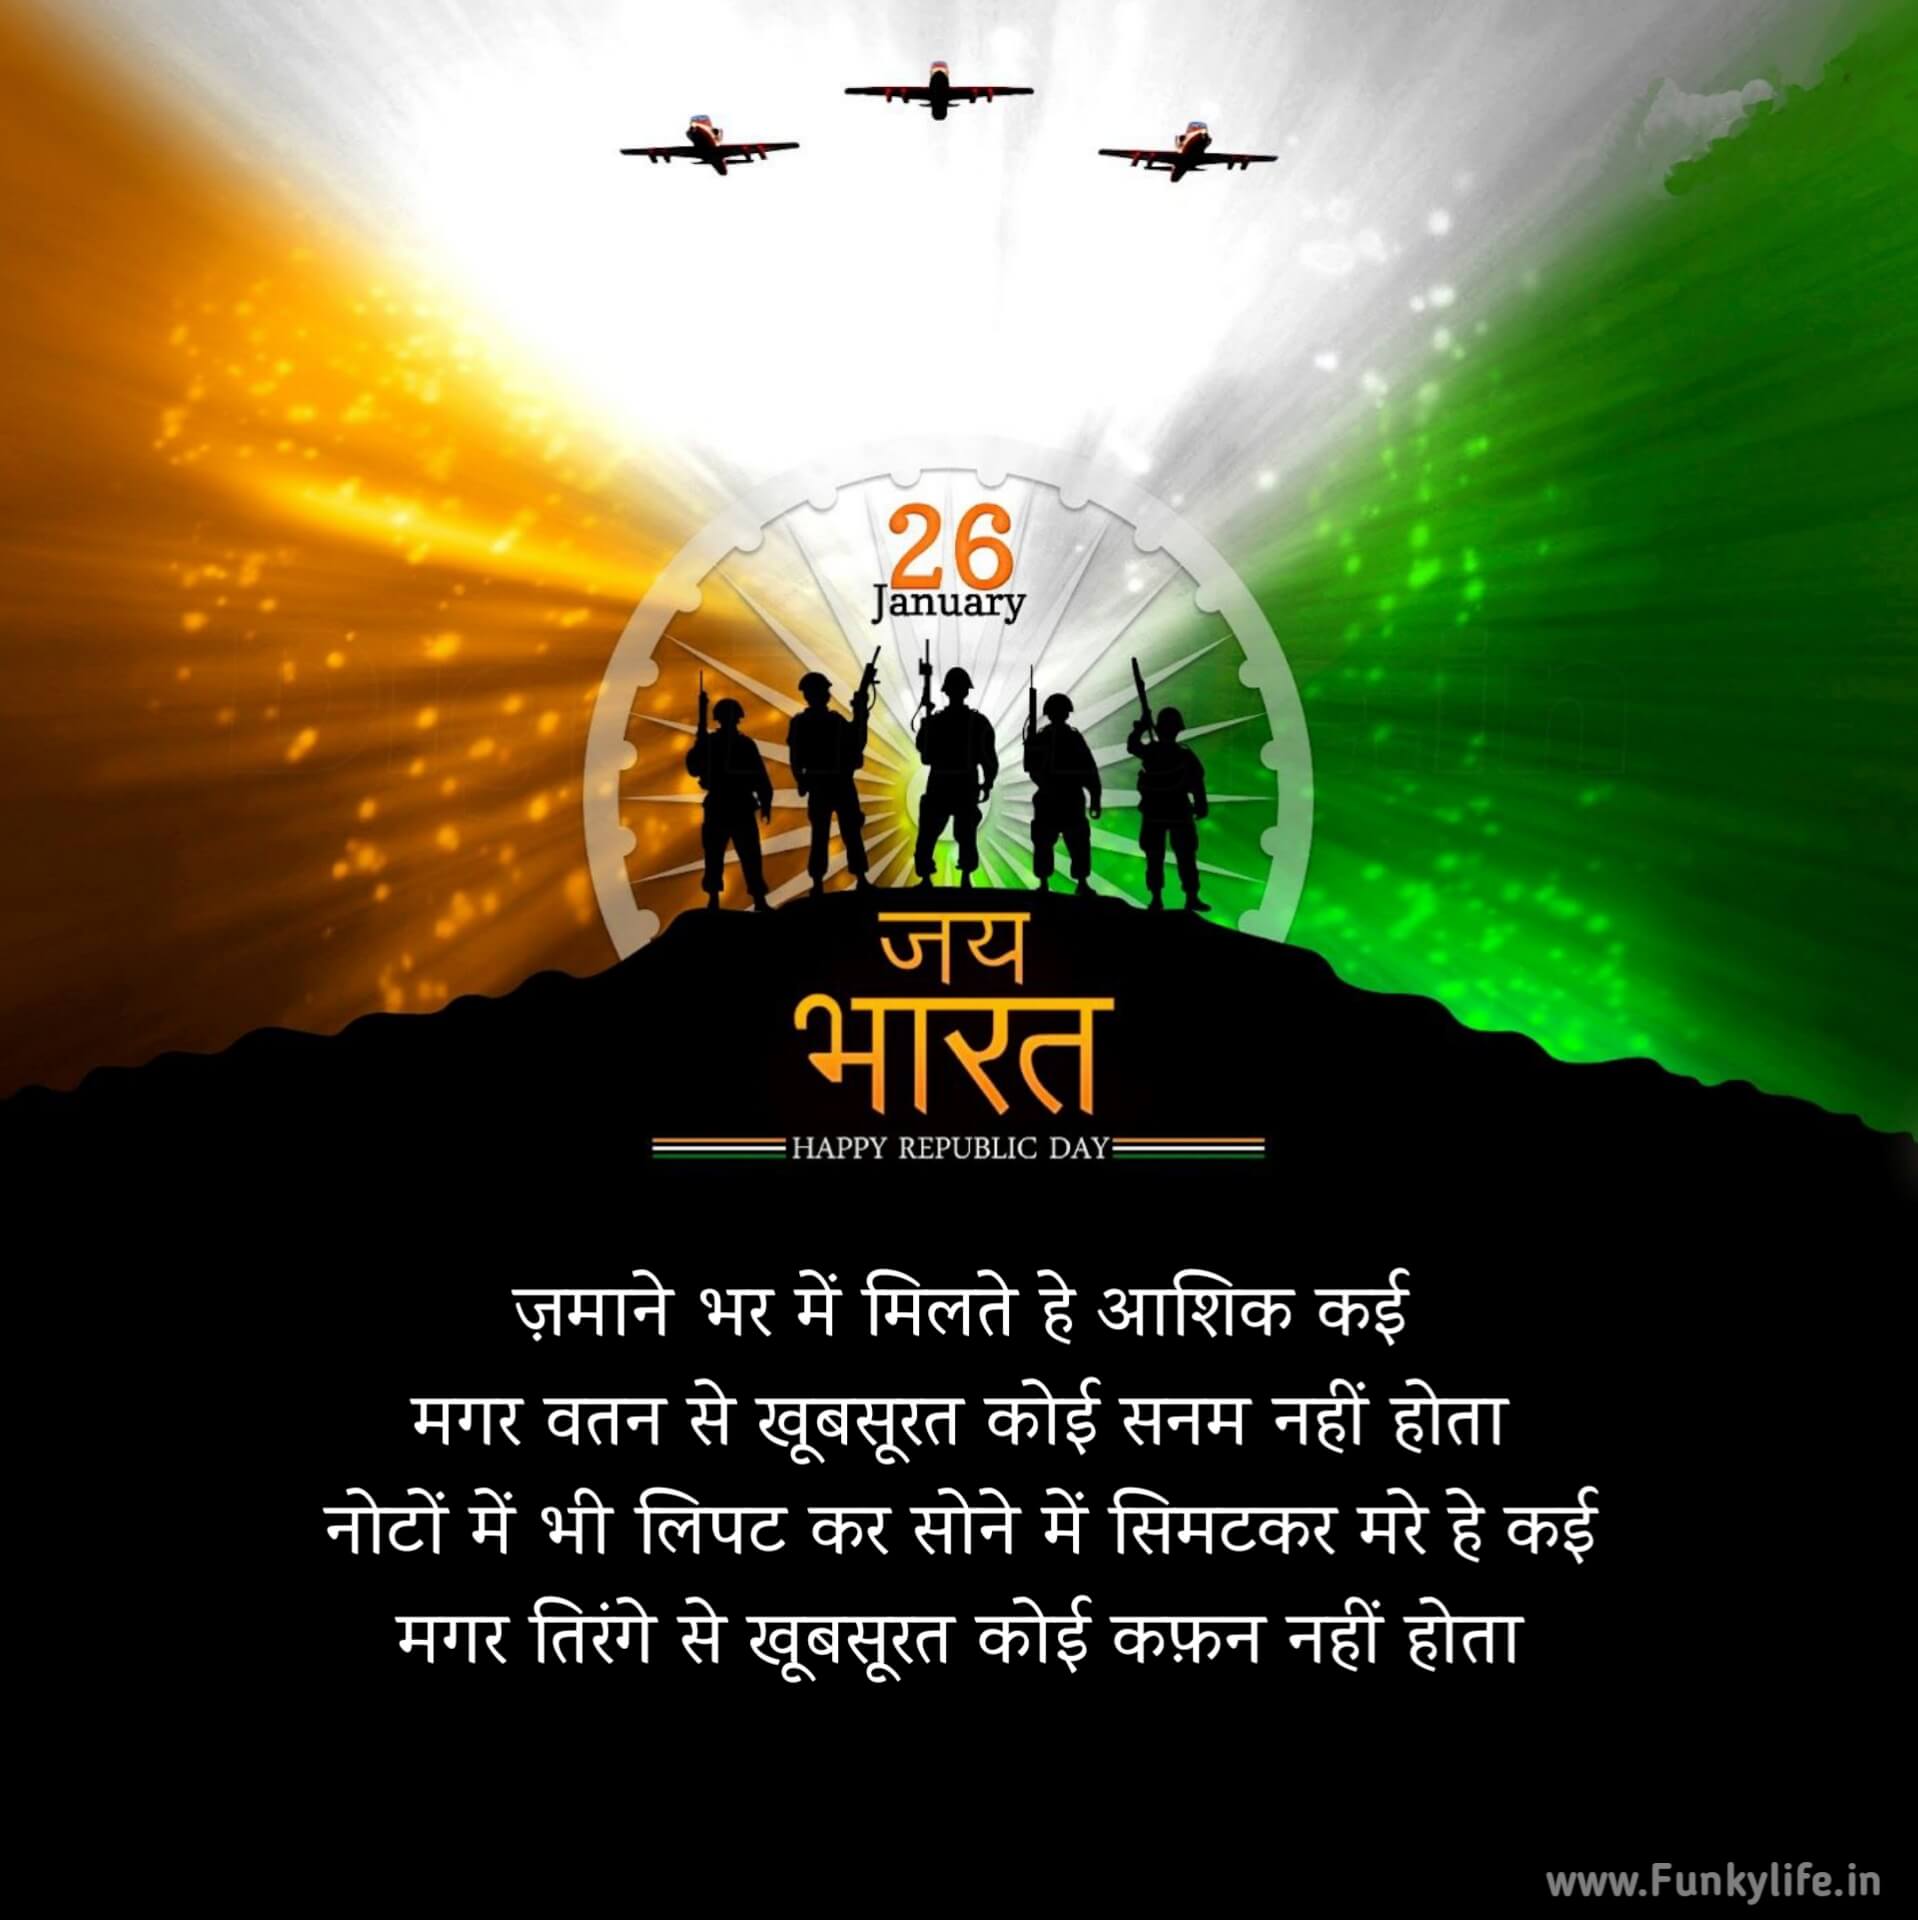 Republic Day Status in Hindi for Army